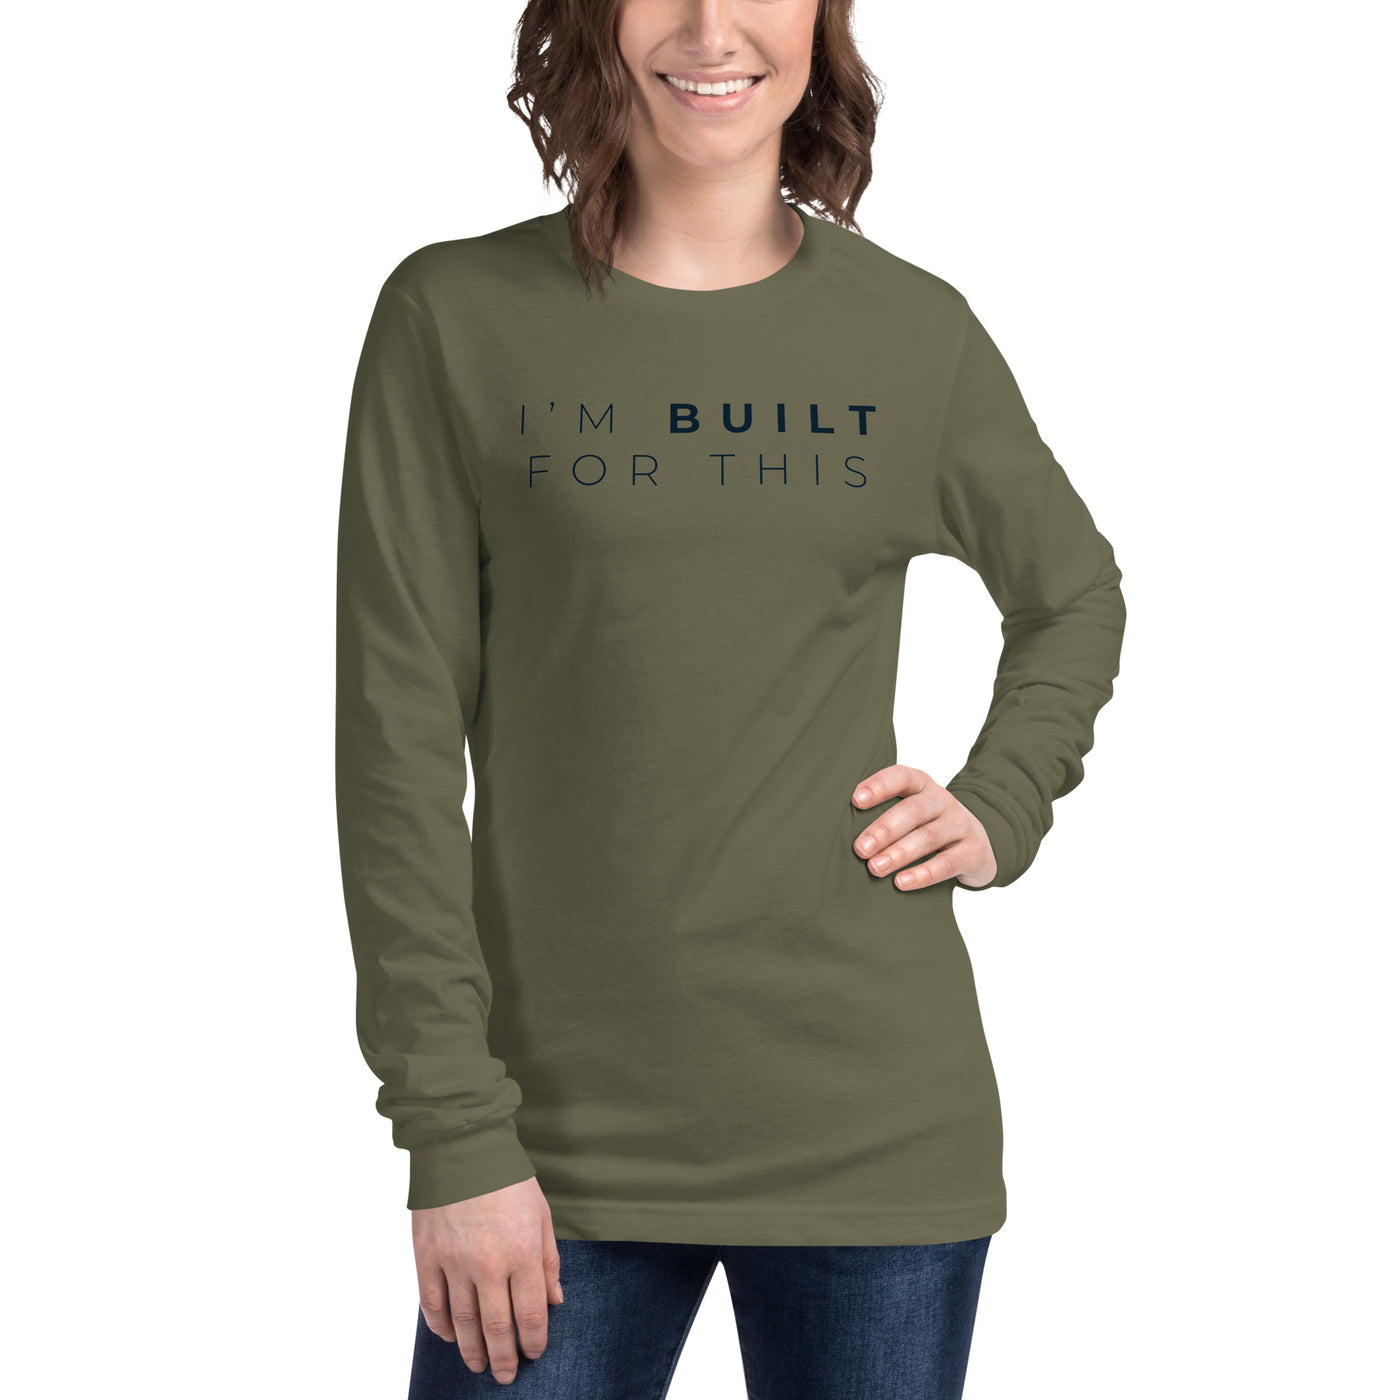 I'm Built For This - Long Sleeve Tee